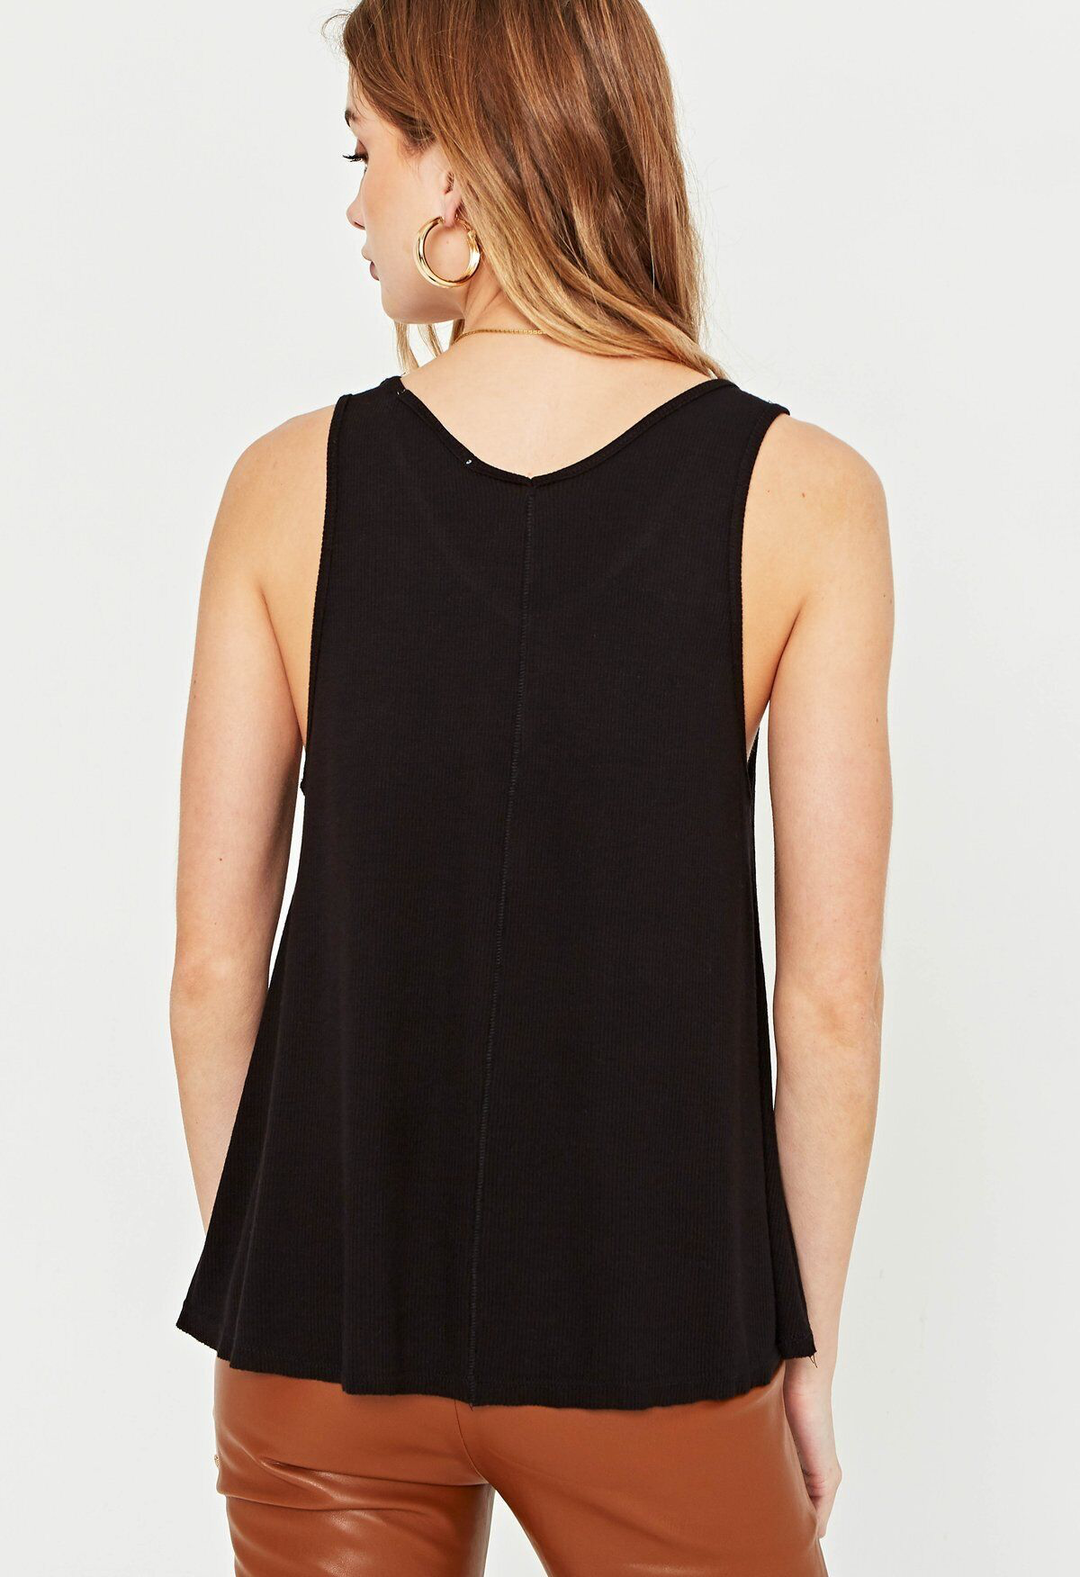 If You Ever Rib Tank - Black - Kingfisher Road - Online Boutique